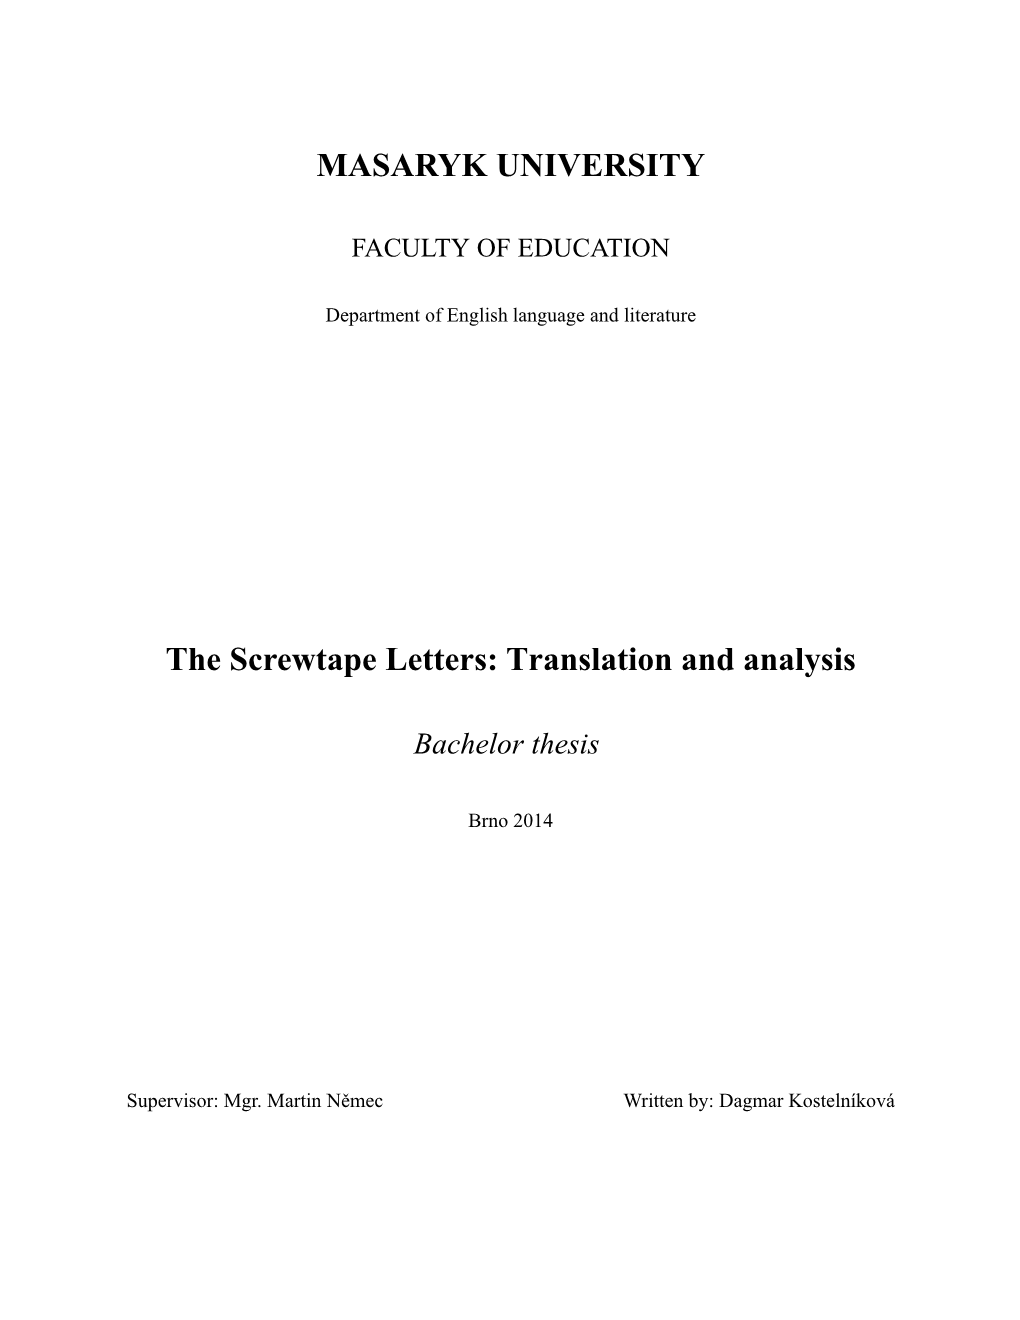 MASARYK UNIVERSITY the Screwtape Letters: Translation And